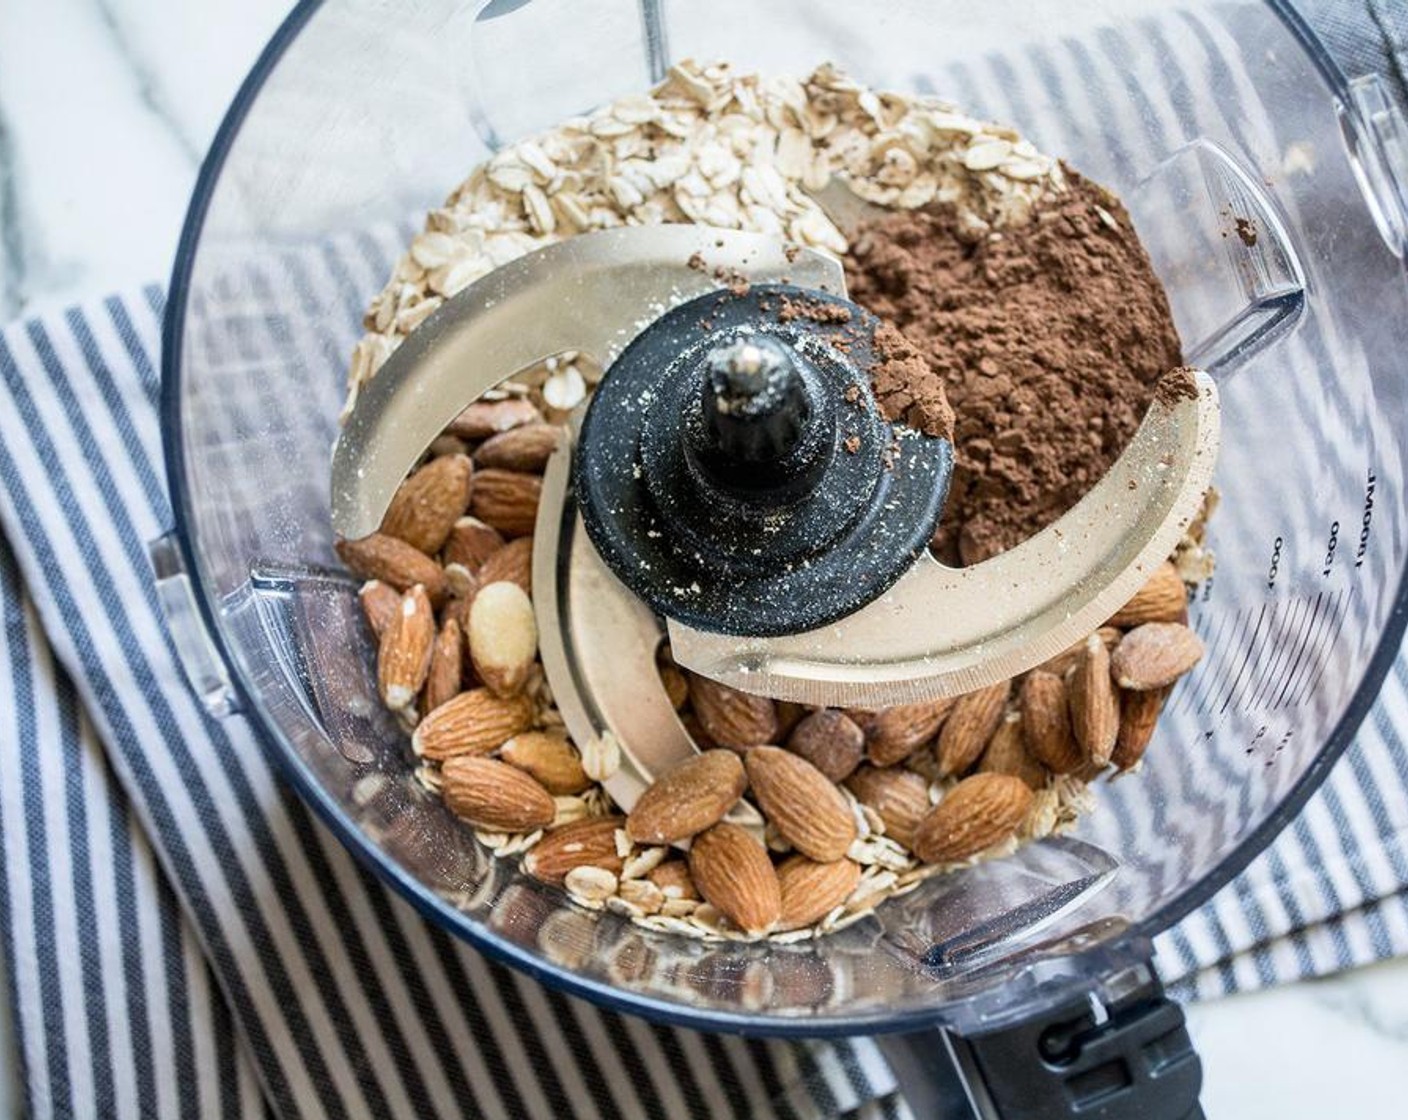 step 1 Add Raw Almonds (1 cup), Oats (1 cup), and Unsweetened Cocoa Powder (1/4 cup) to the bowl of a food processor, process 10 to 20 seconds or until a course flour forms.